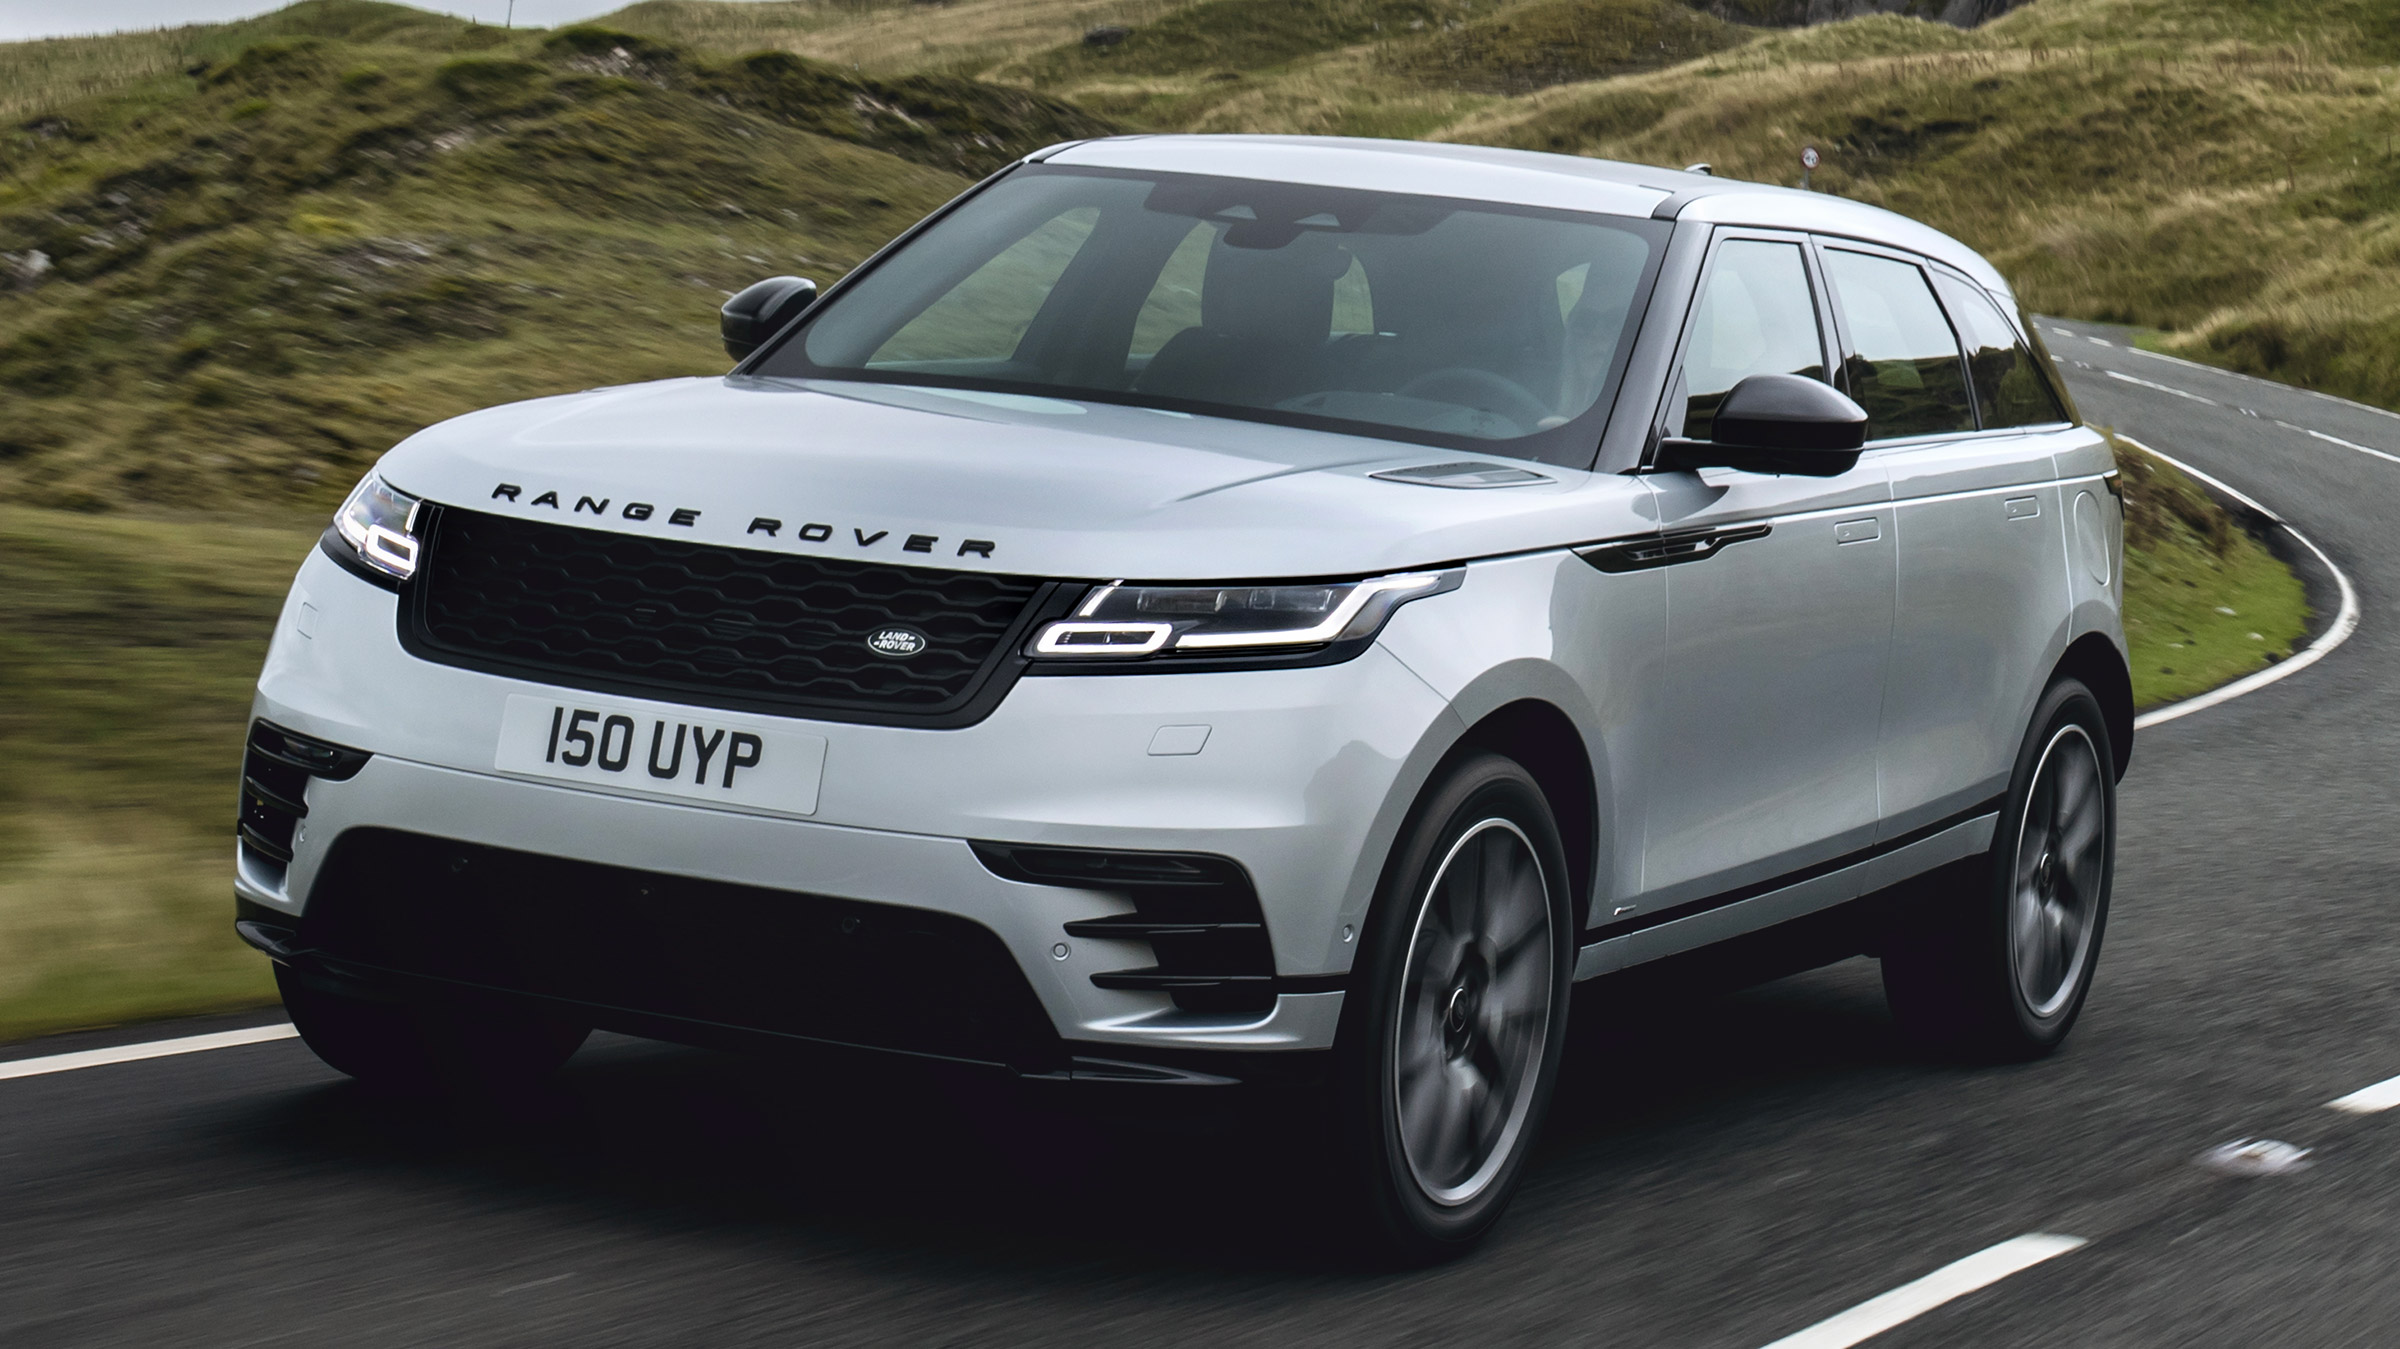 New Range Rover Velar Phev Launched With 33 Mile Electric Range Auto